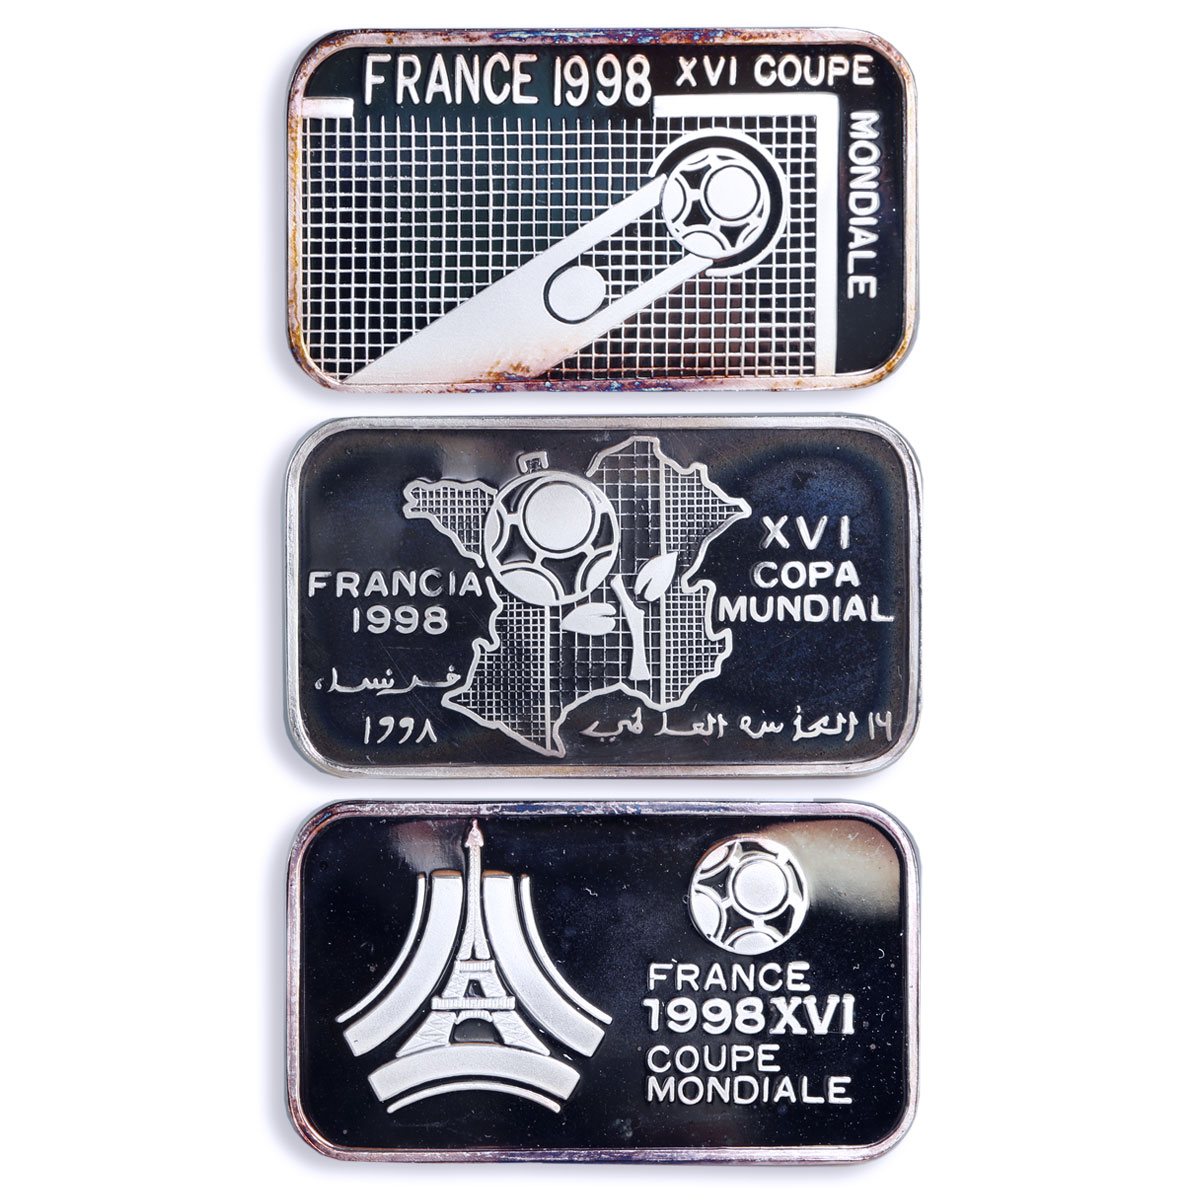 Benin Congo Saharawi set of 6 coins Football World Cup in France Ag coins 1997